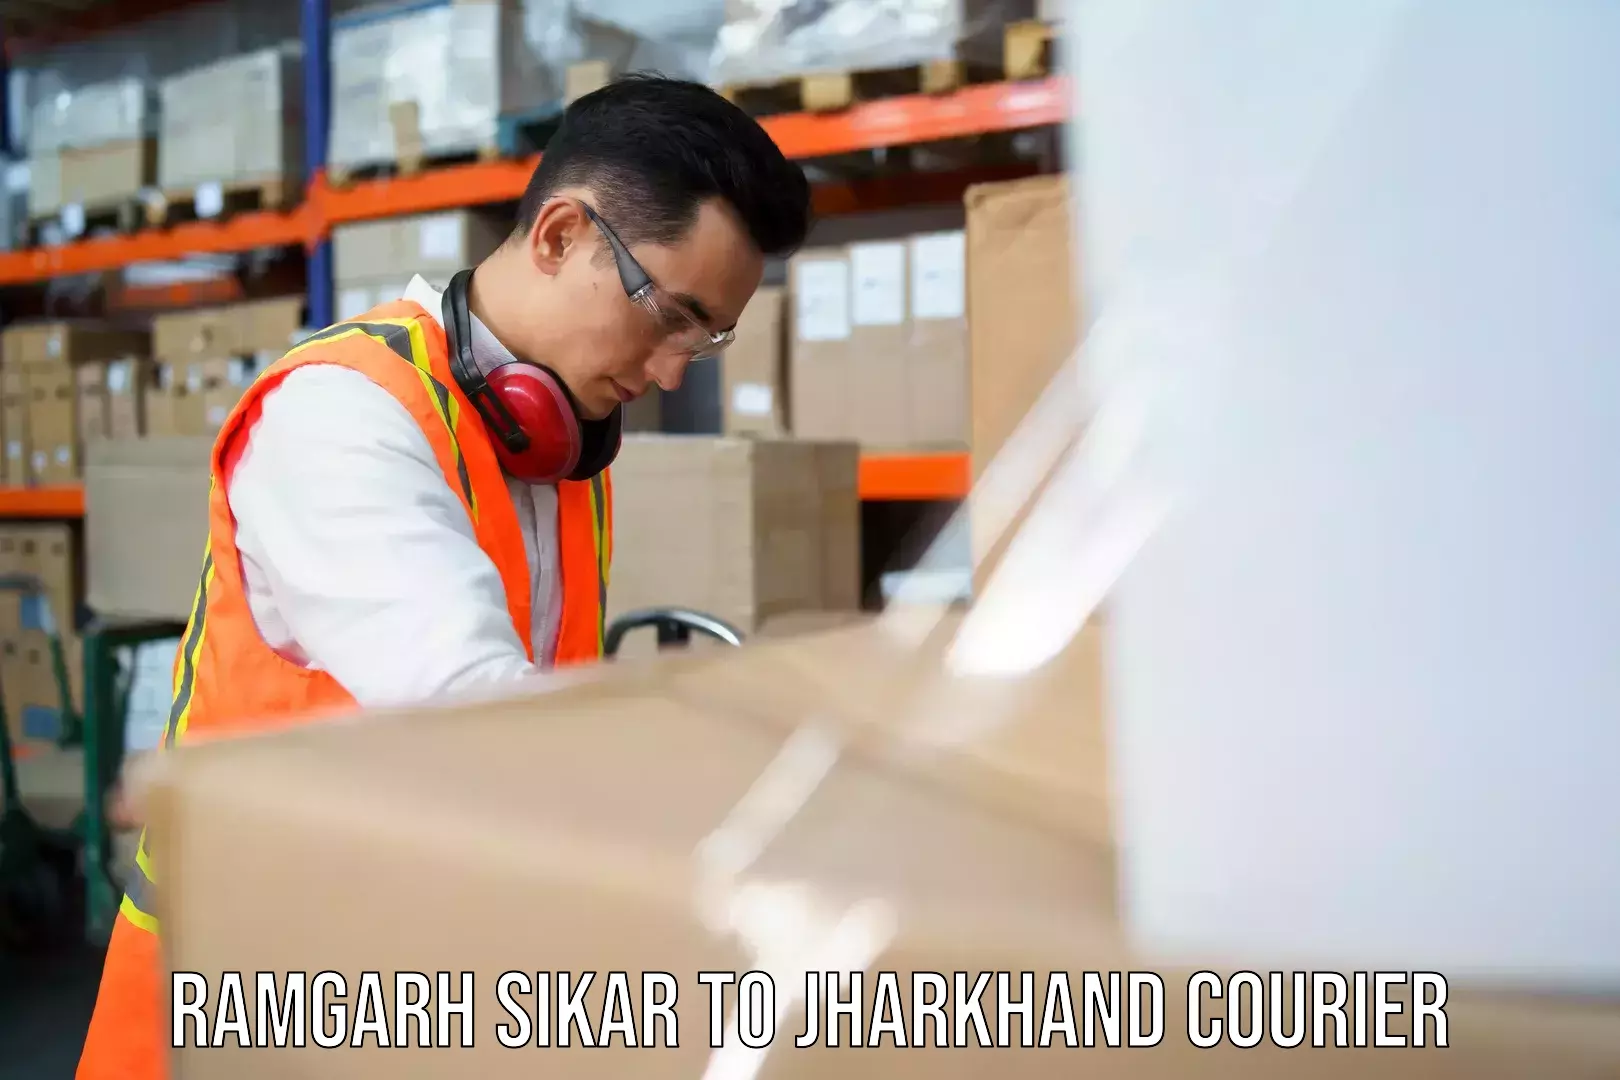 Courier dispatch services Ramgarh Sikar to Patratu